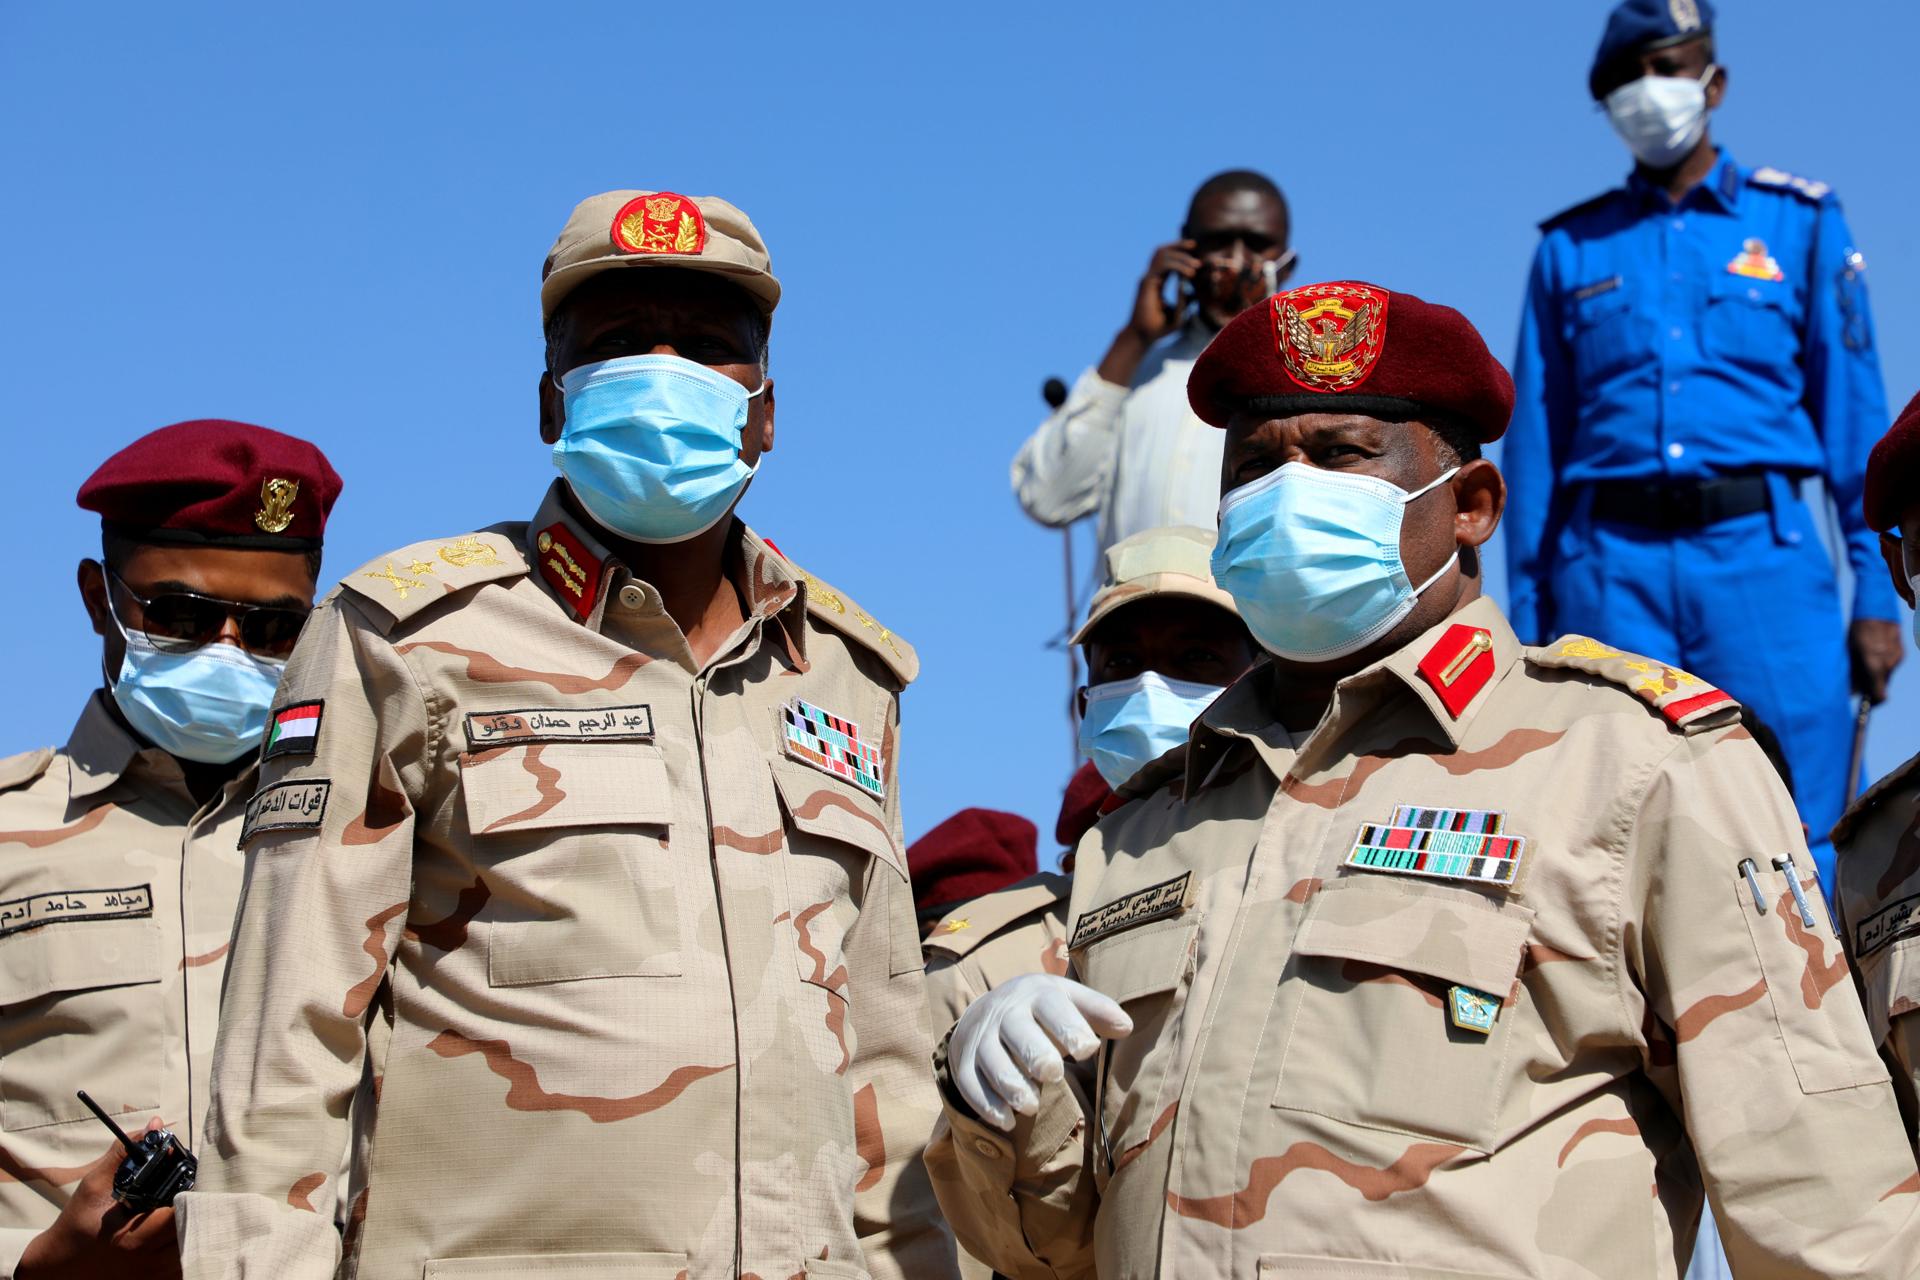 Abd al-Rahim Hamdan Dogolo (L), Second Commander of the Rapid Support Forces, Brigadier General Alam al-Huda Hamid (R), representative of the Rapid Support Operations Room, during the arrangements for the start of the celebration for the reception of peace leaders, as organized by the transitional government, in Khartoum, Sudan, 15 November 2020. EFE-EPA/MOHAMMED ABU OBAID/FILE